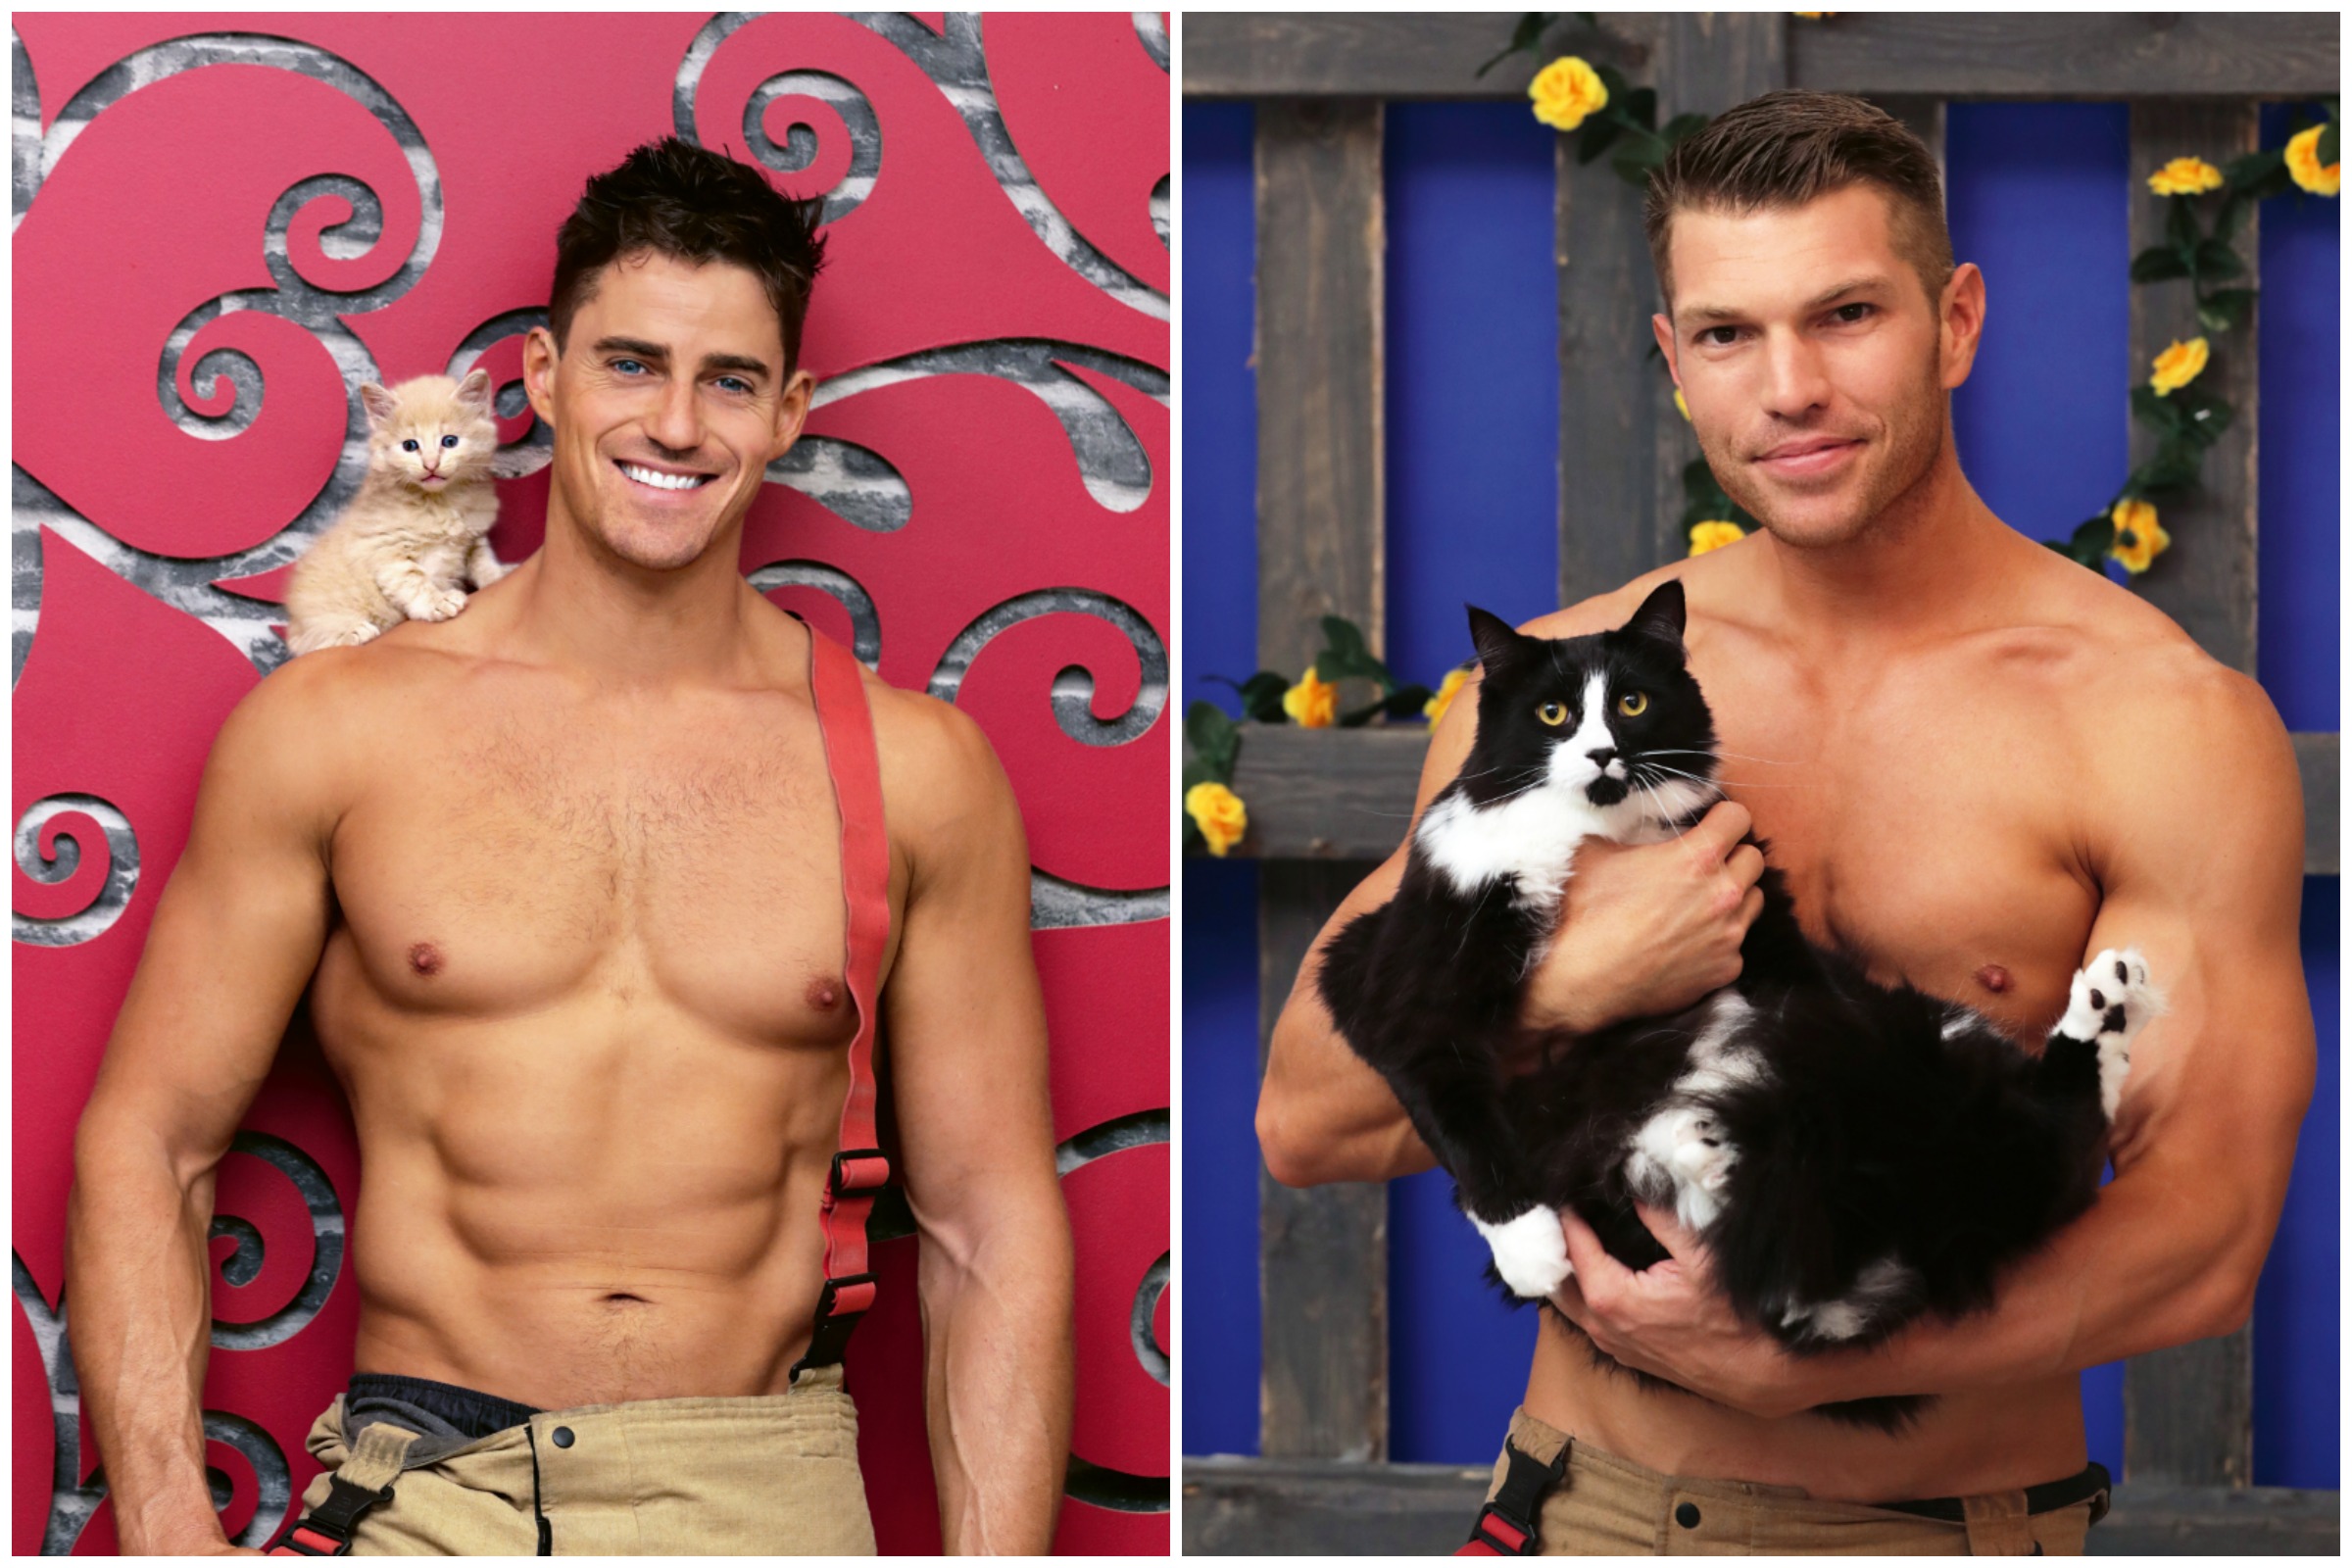 Firefighters Pose Topless With Cats in Scorching Hot 2022 Calendar